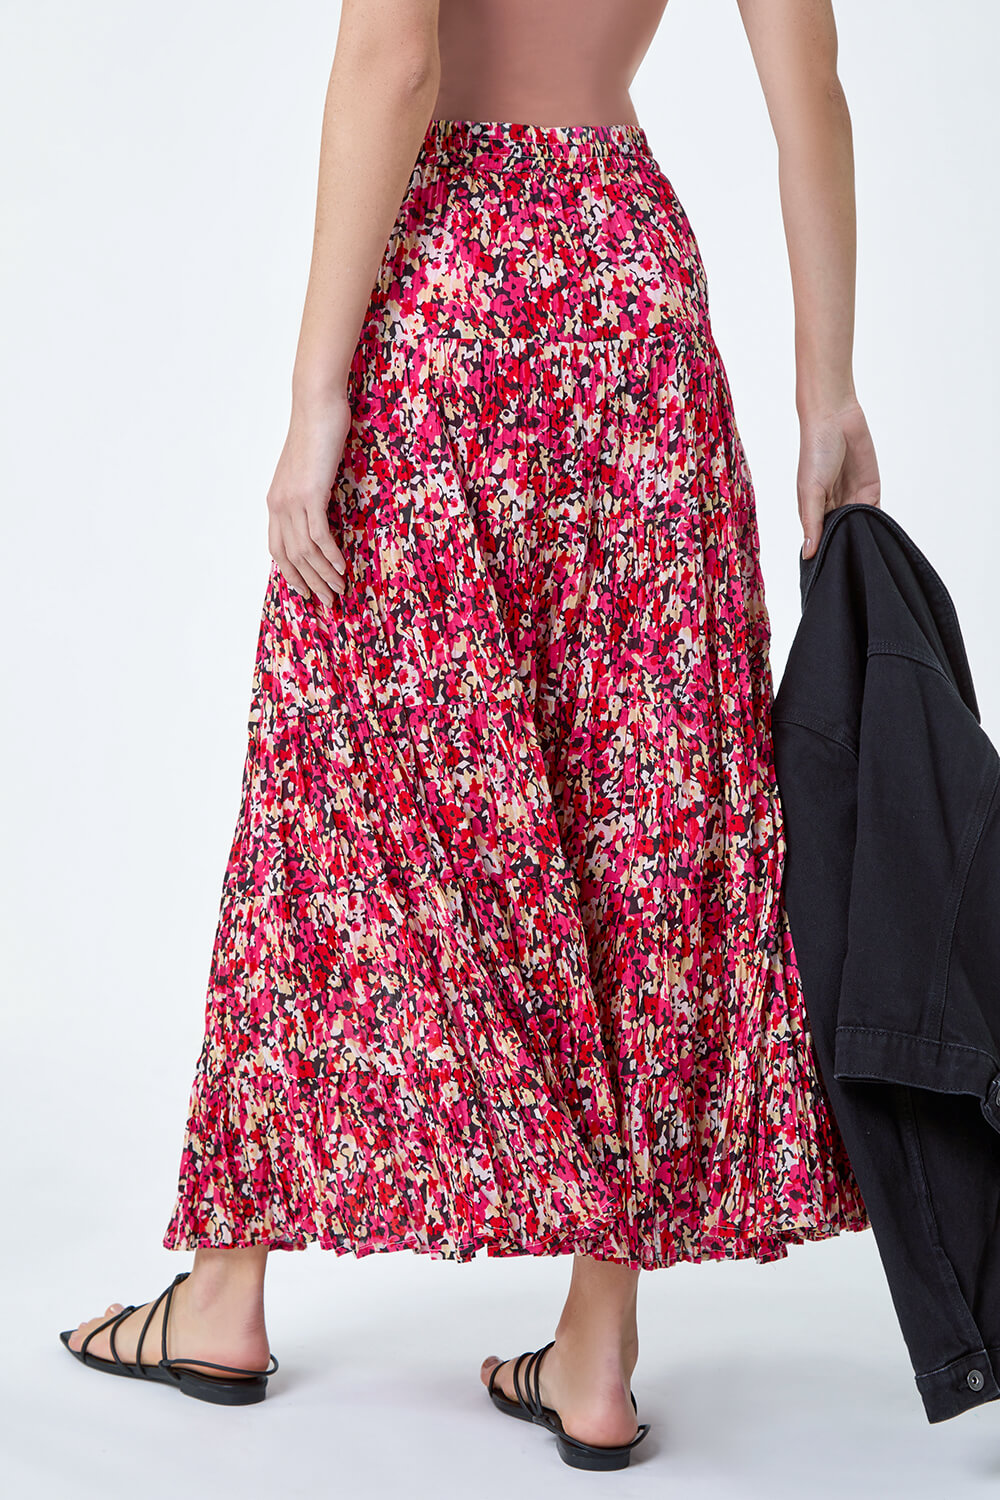 PINK Floral Crinkle Cotton Tiered Maxi Skirt, Image 3 of 5